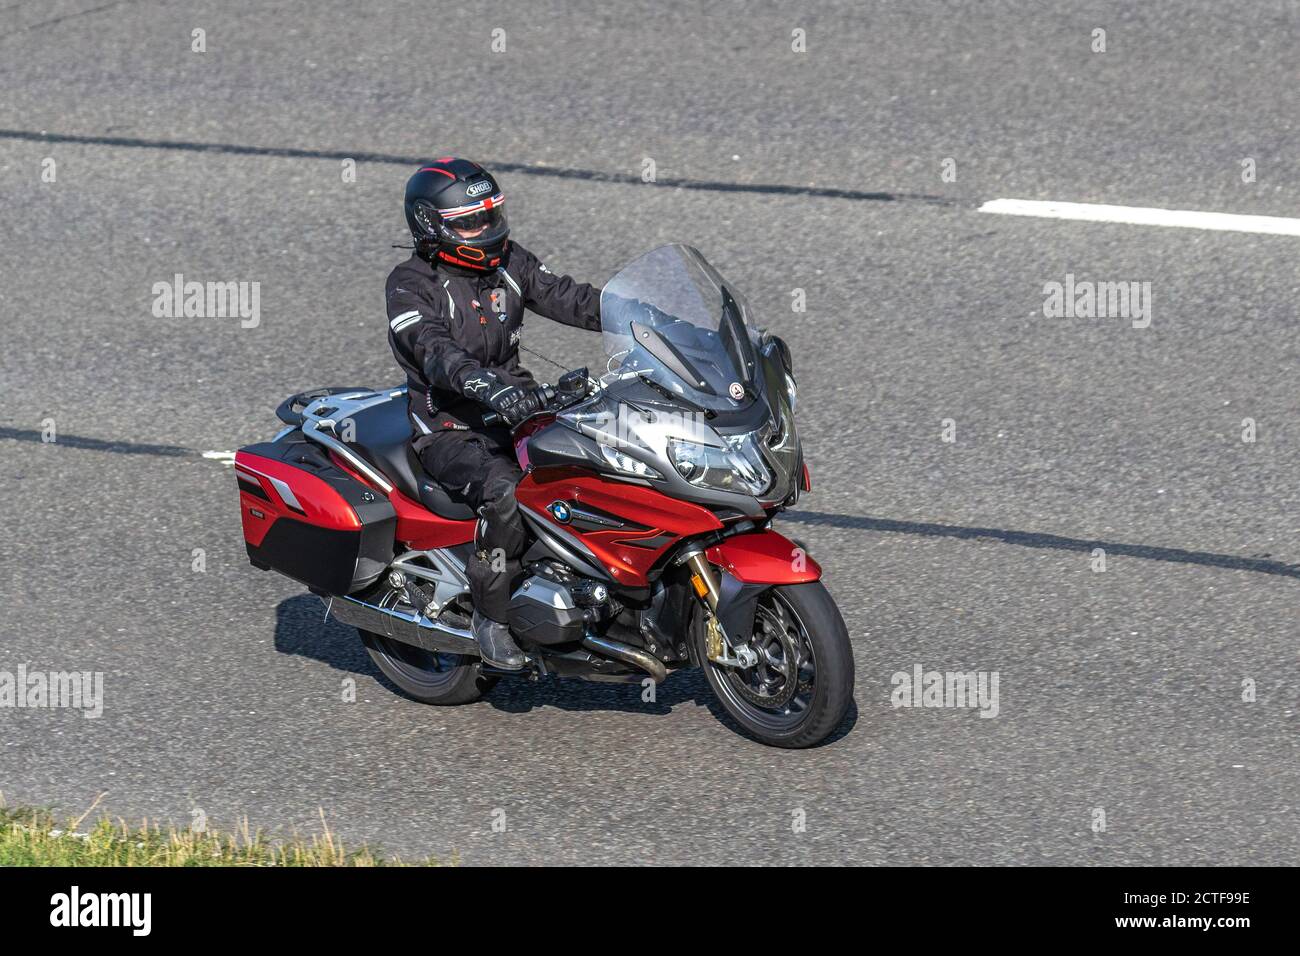 Bmw Motorrad High Resolution Stock Photography and Images - Alamy